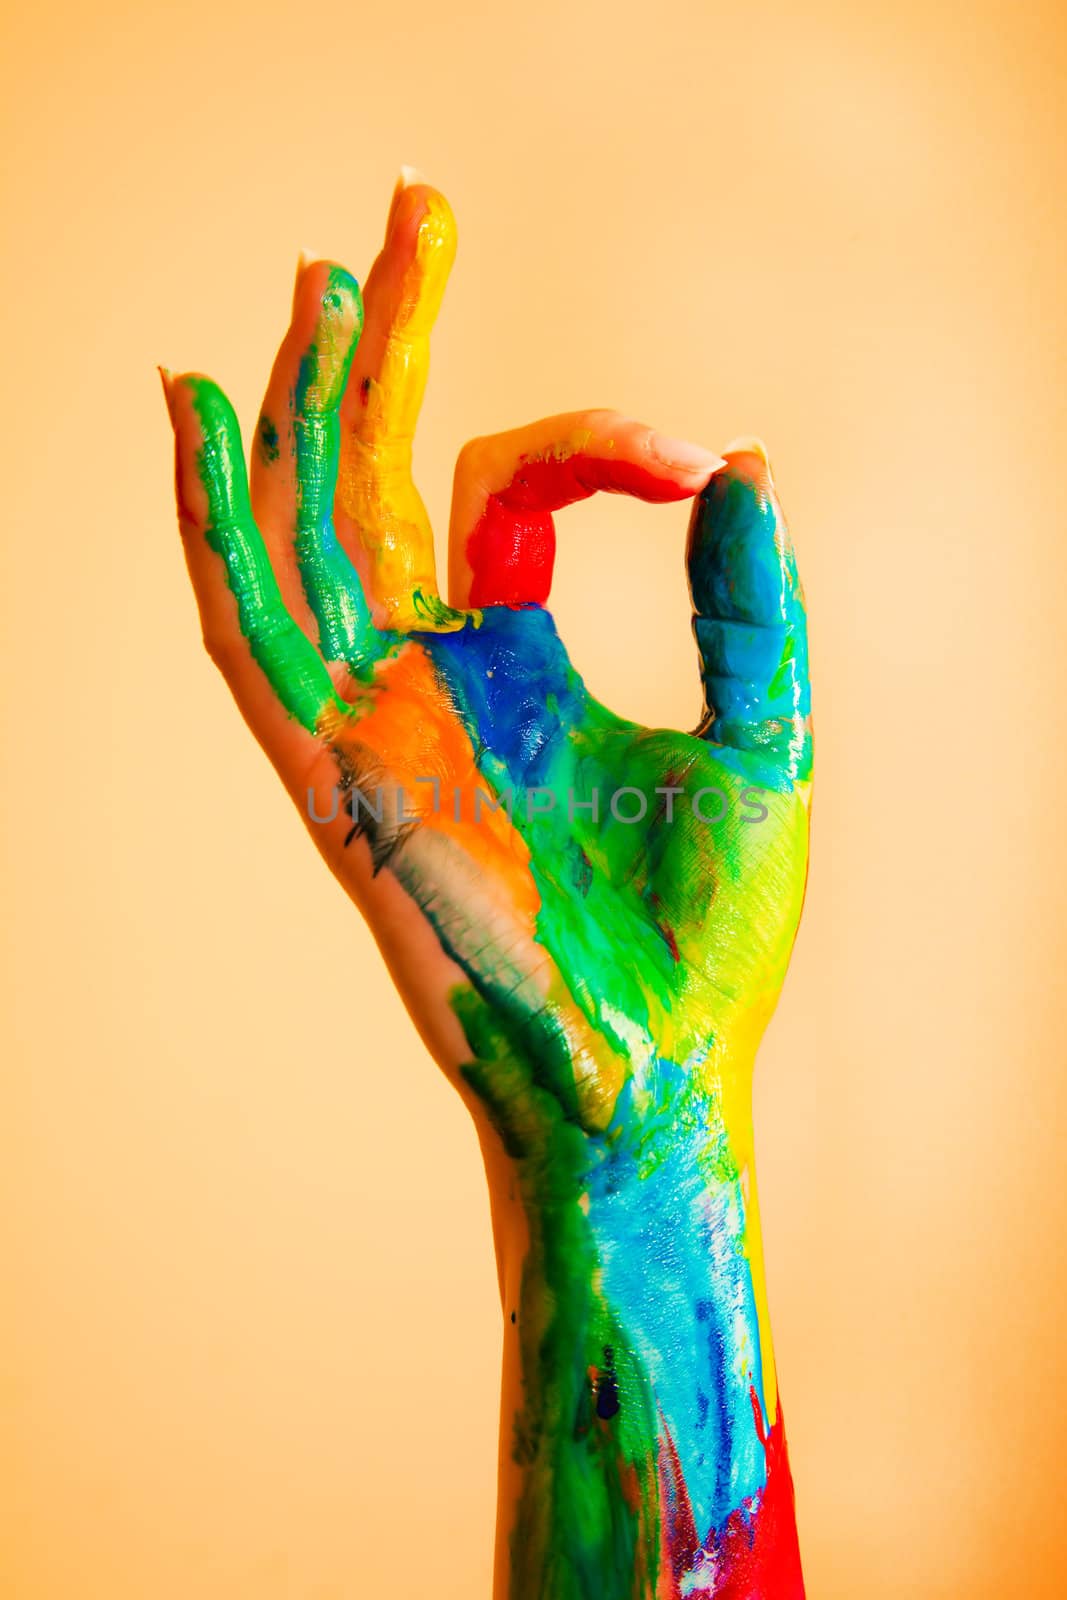 Painted hand with OK sign, colorful fun. Creative, funny and artistic means happy! 